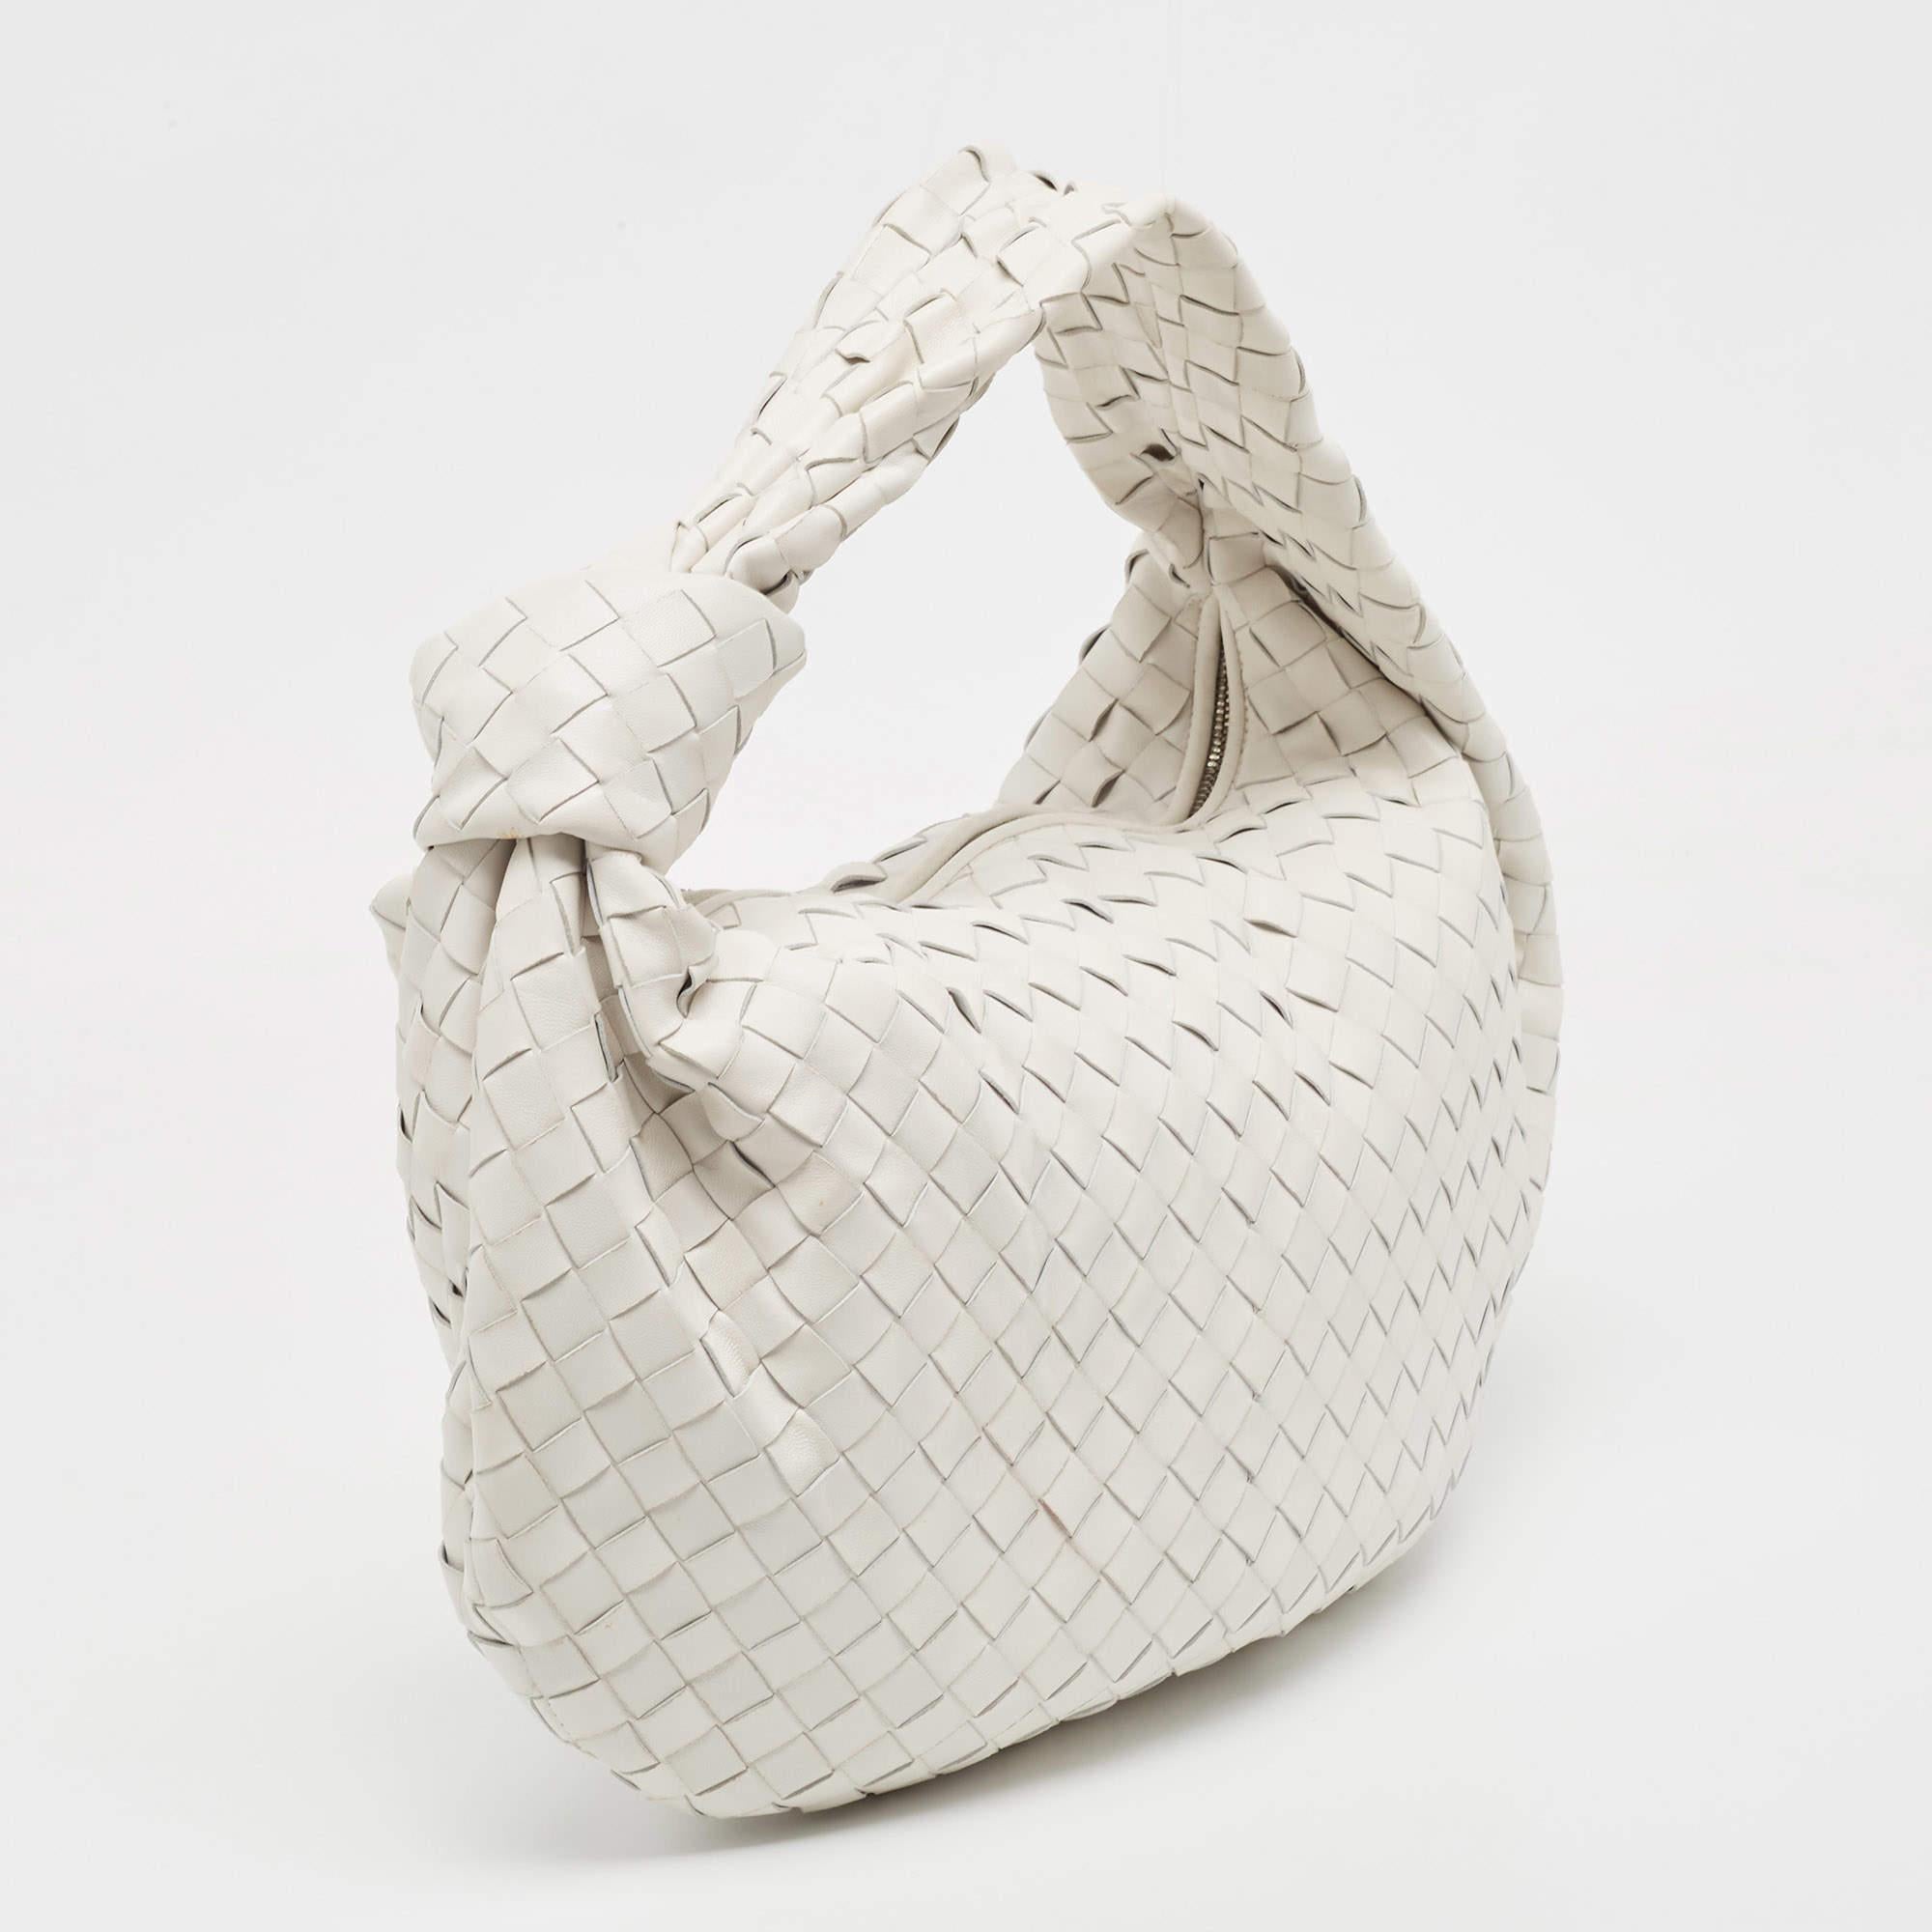 This Bottega Veneta Jodie bag is crafted from leather using their signature Intrecciato weaving technique into a seamless silhouette. This white bag, personifying elegance and subtle charm, is held by a knotted handle. The bag has an interior sized